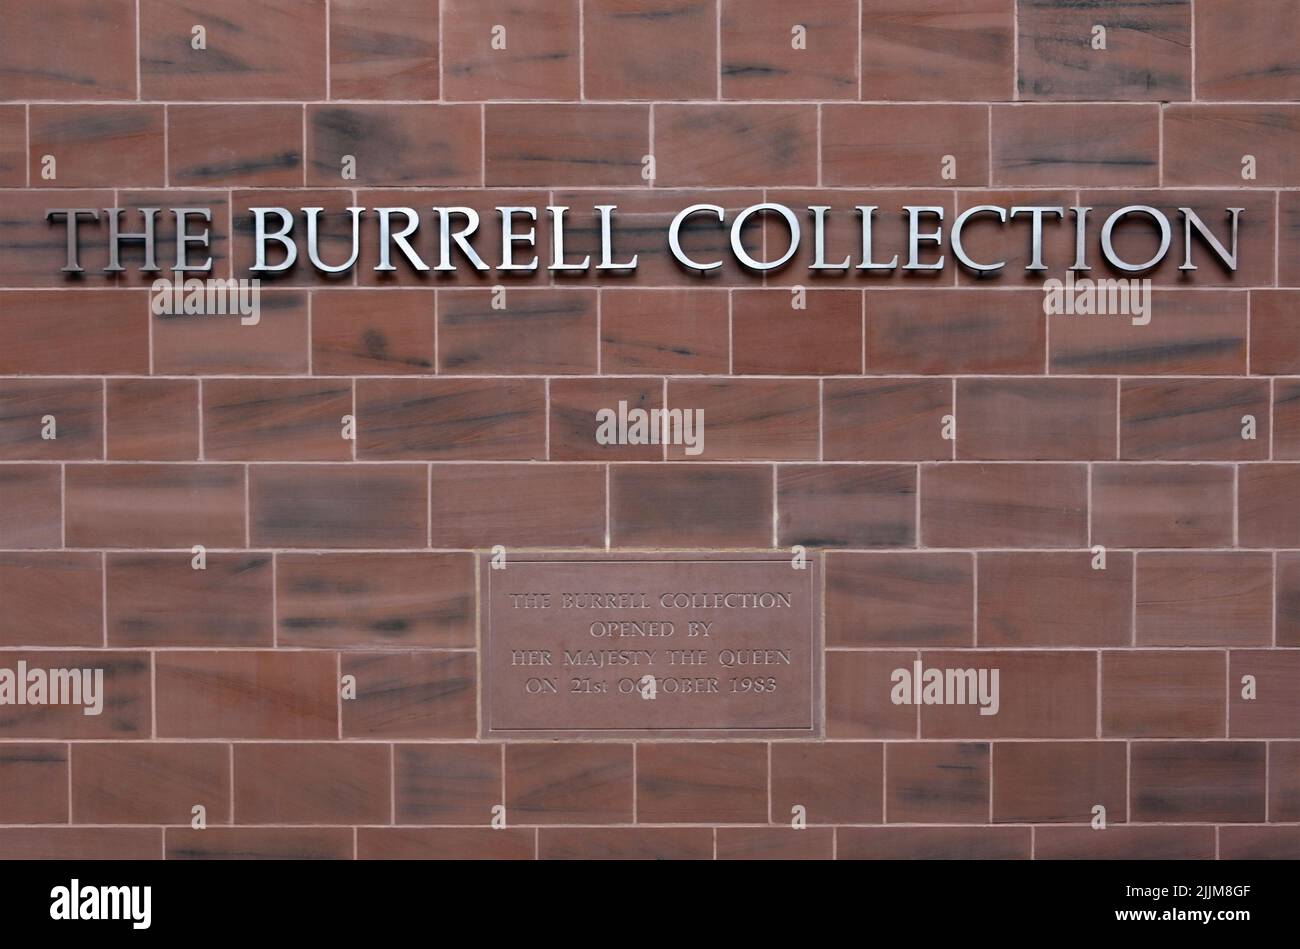 Stone commemorating the opening of The Burrell Collection by Her Majesty The Queen on 21st October 1983.; The Burrell Collection; Glasgow; Scotland. Stock Photo